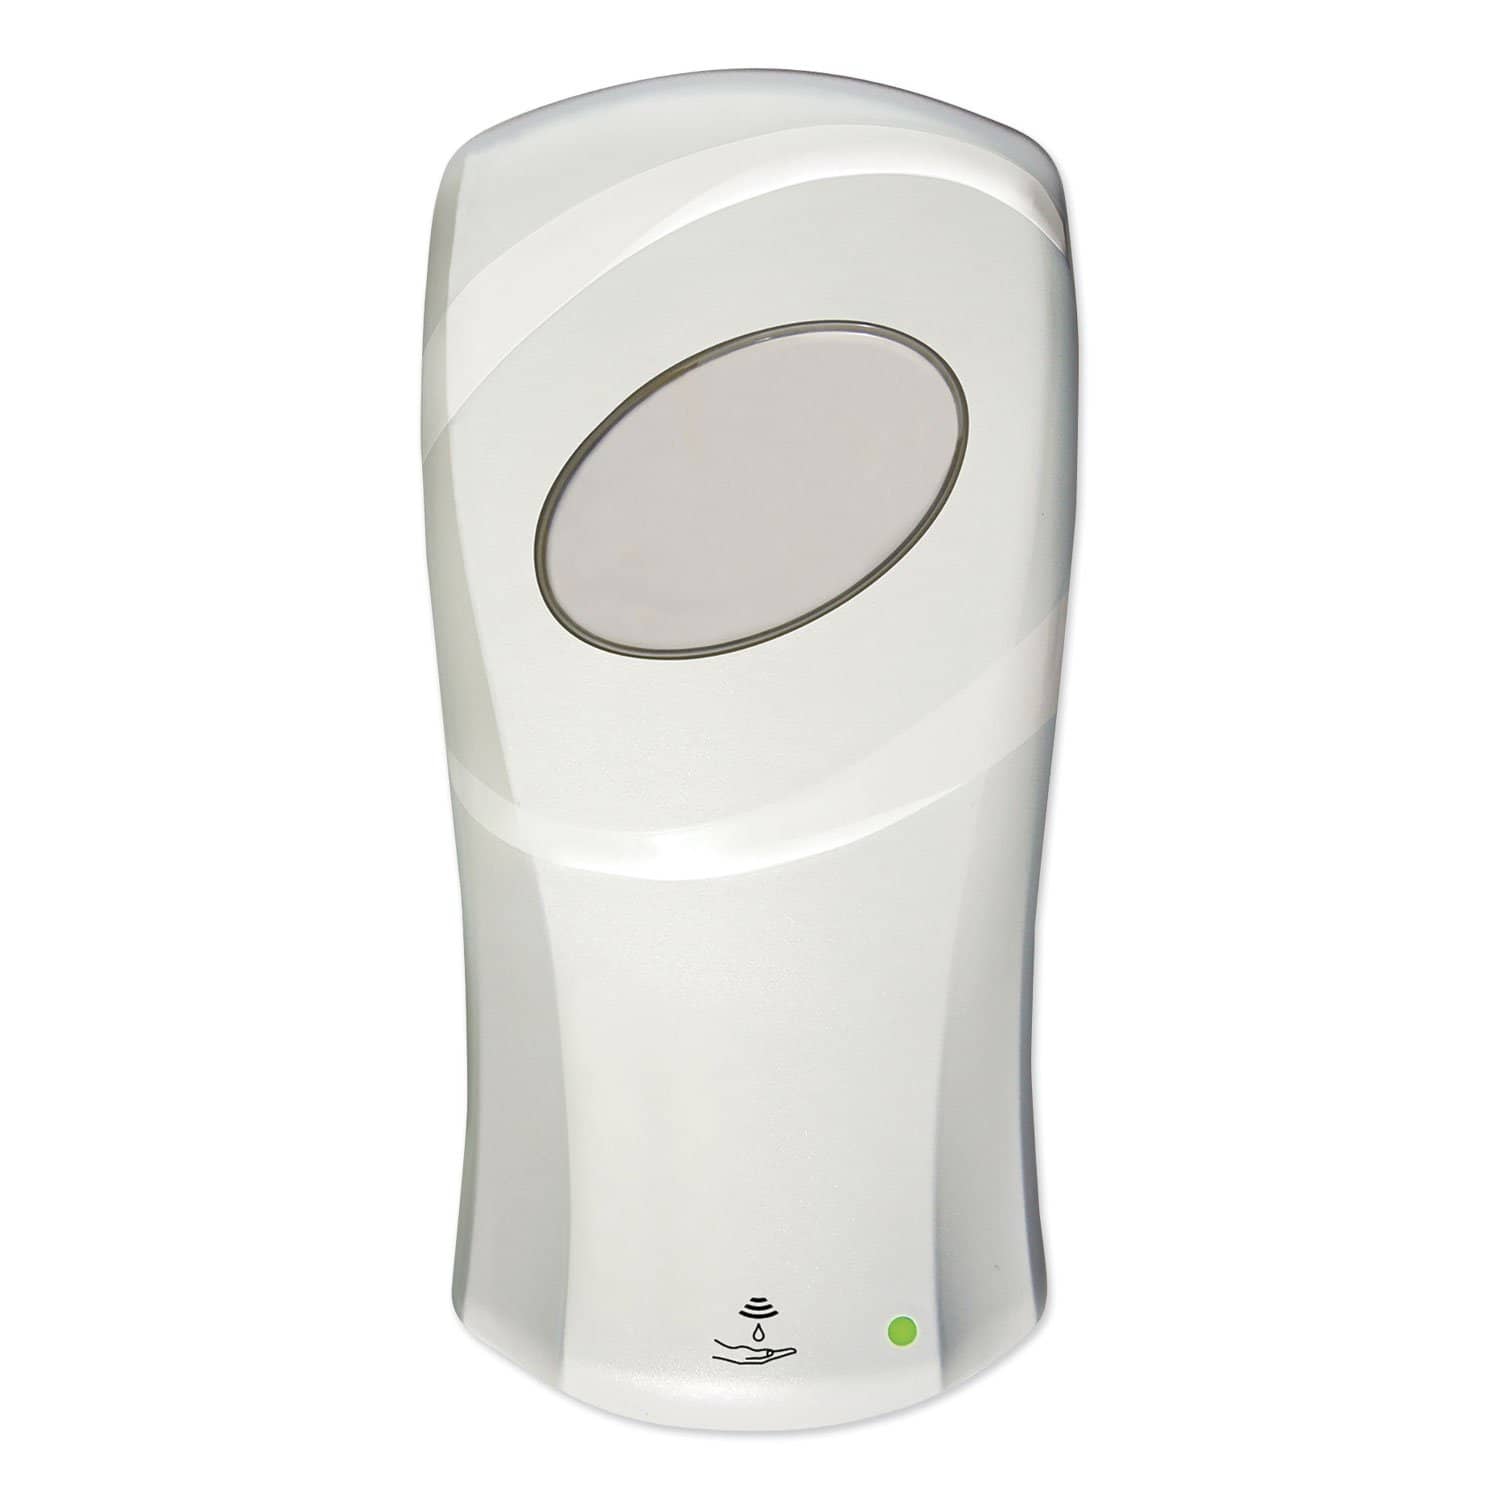 Dial Fit Touch Free Automatic Soap Dispenser, Foam, White, Includes 2PK Hypoallergenic Refills - TotalRestroom.com